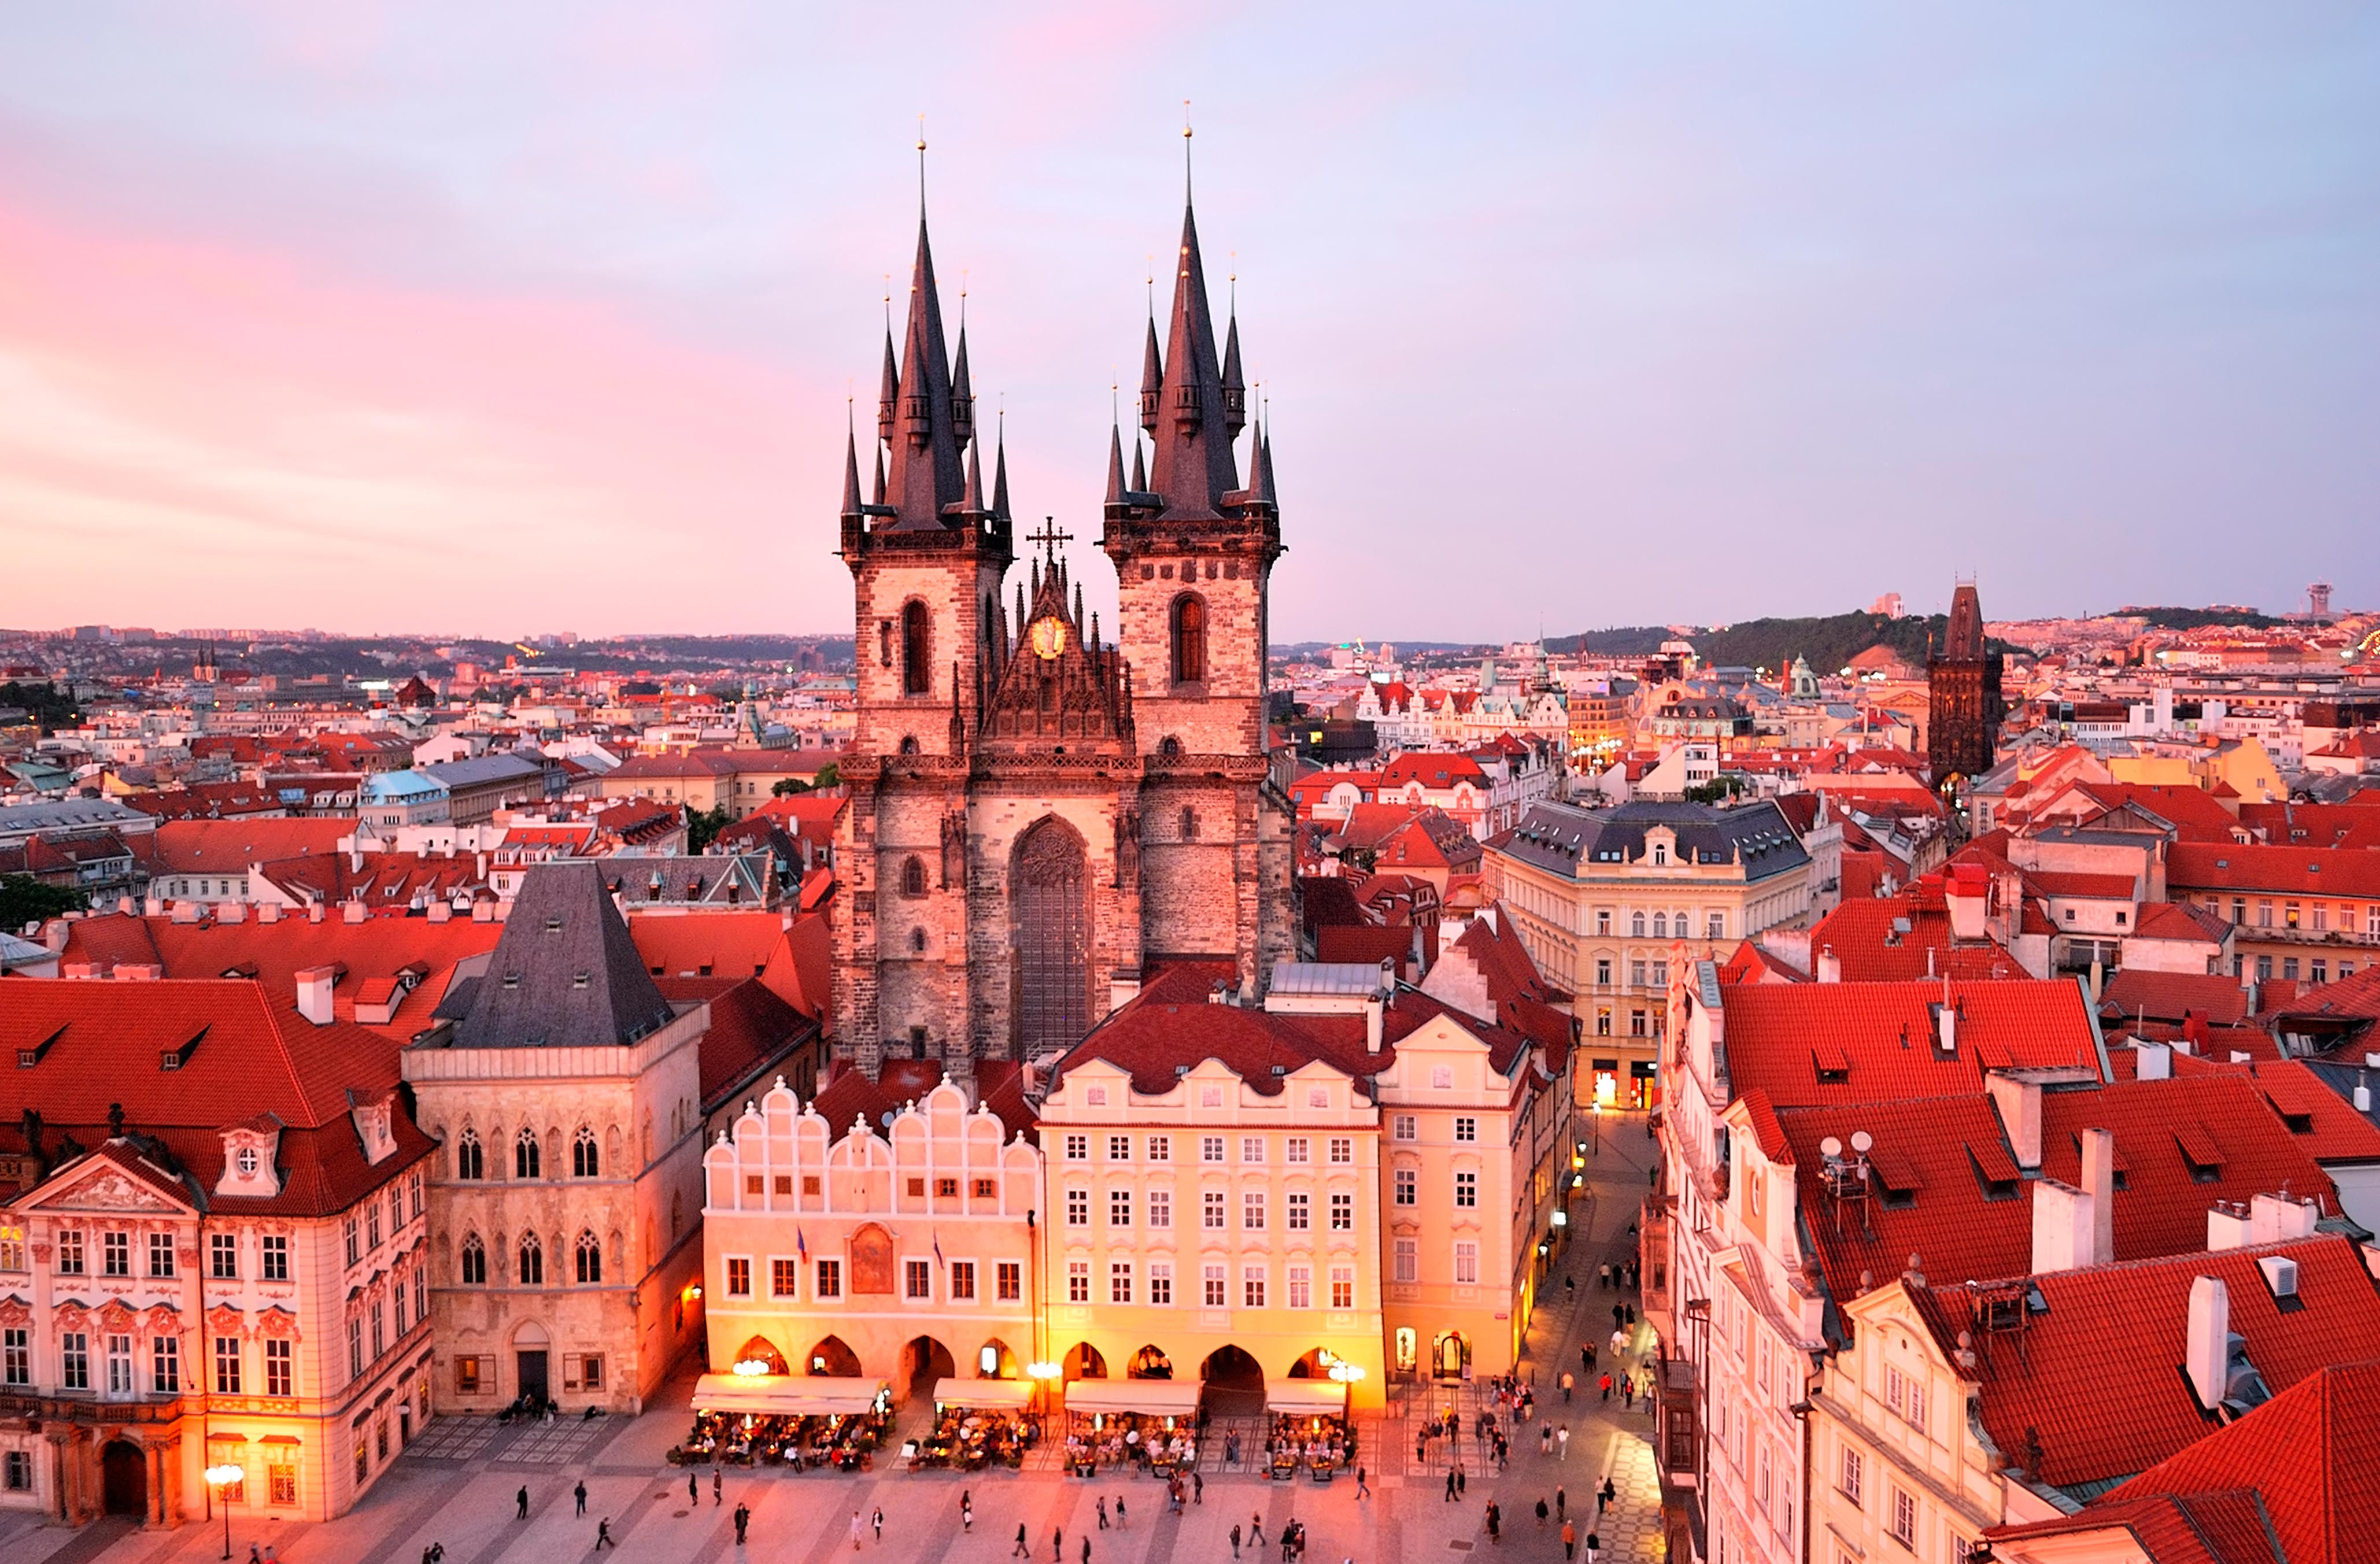 Prague City Most Popular Destination with Attractive Night Life - Gets